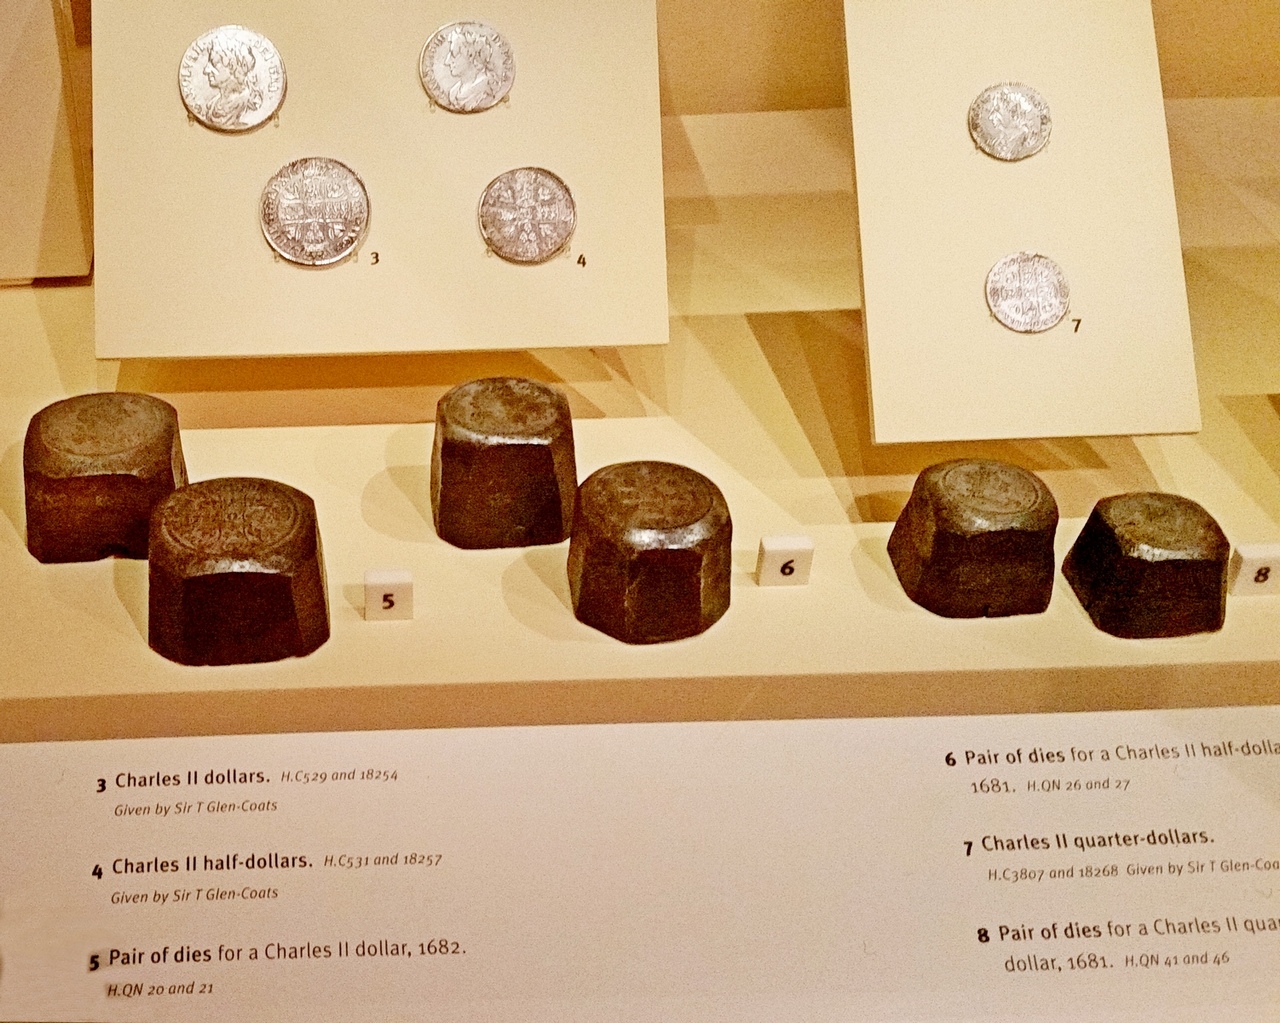 Scotland_2019_09_National_Museum_coins_a_low_res.jpg